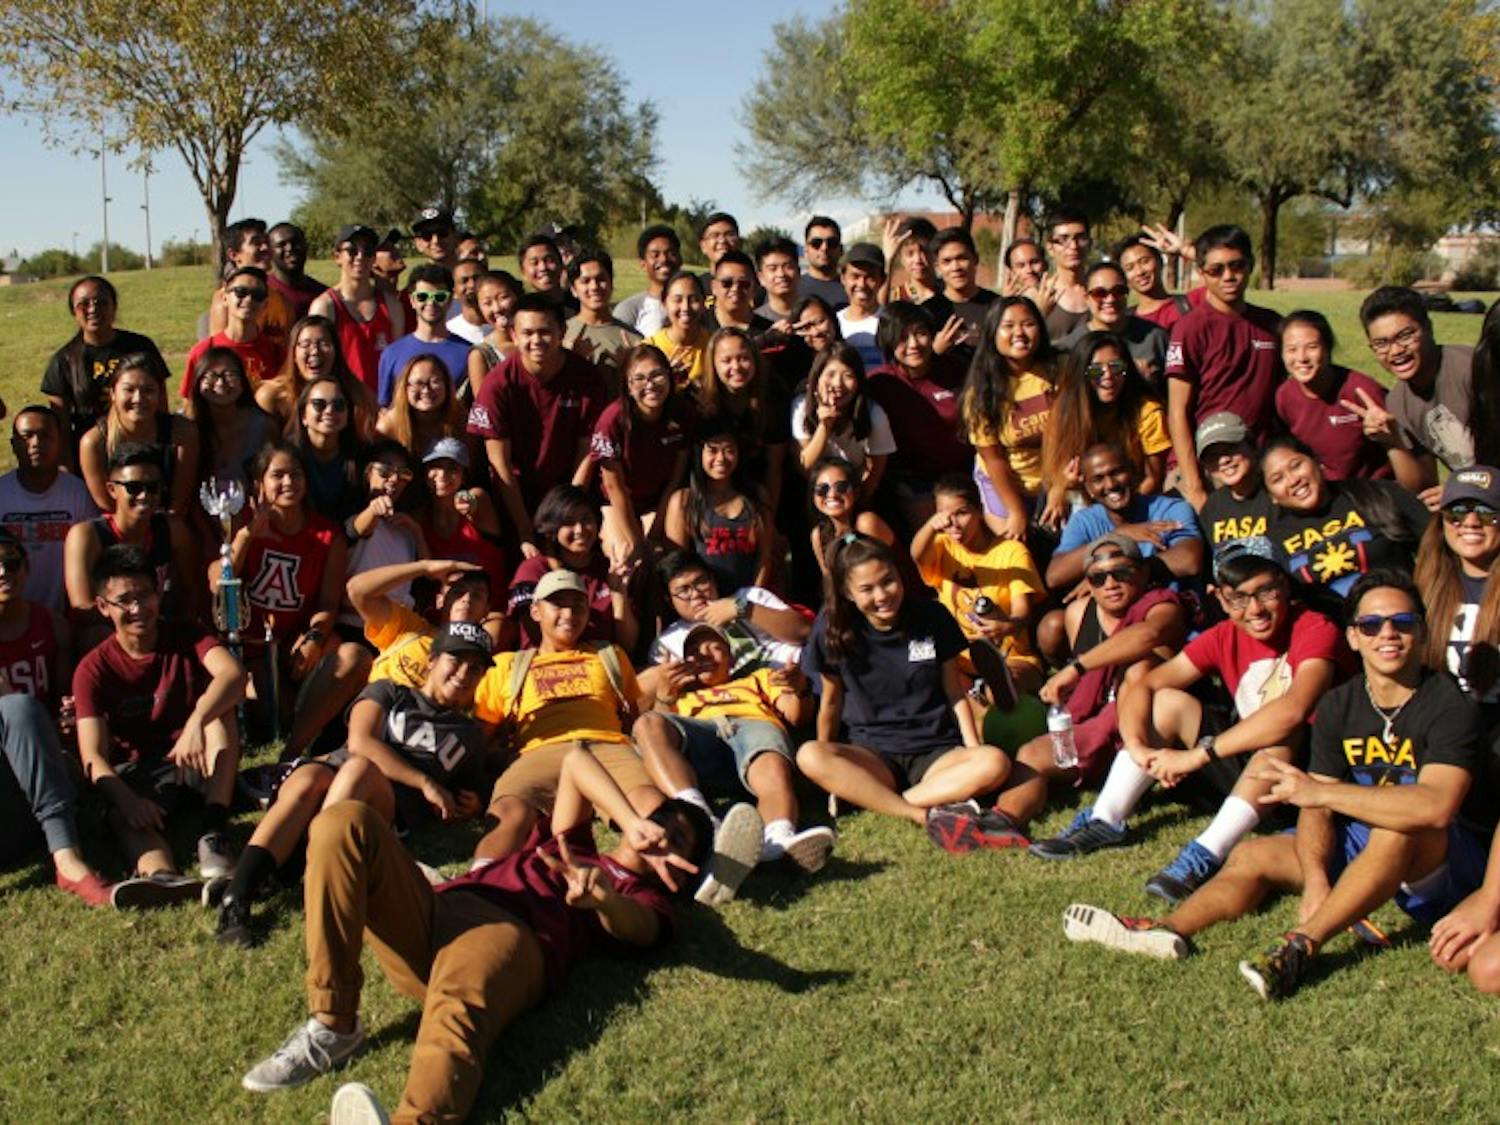 Students from ASU PASA, as well as&nbsp;students from NAU and University of&nbsp;Arizona Filipino clubs pose for a photo during an event.